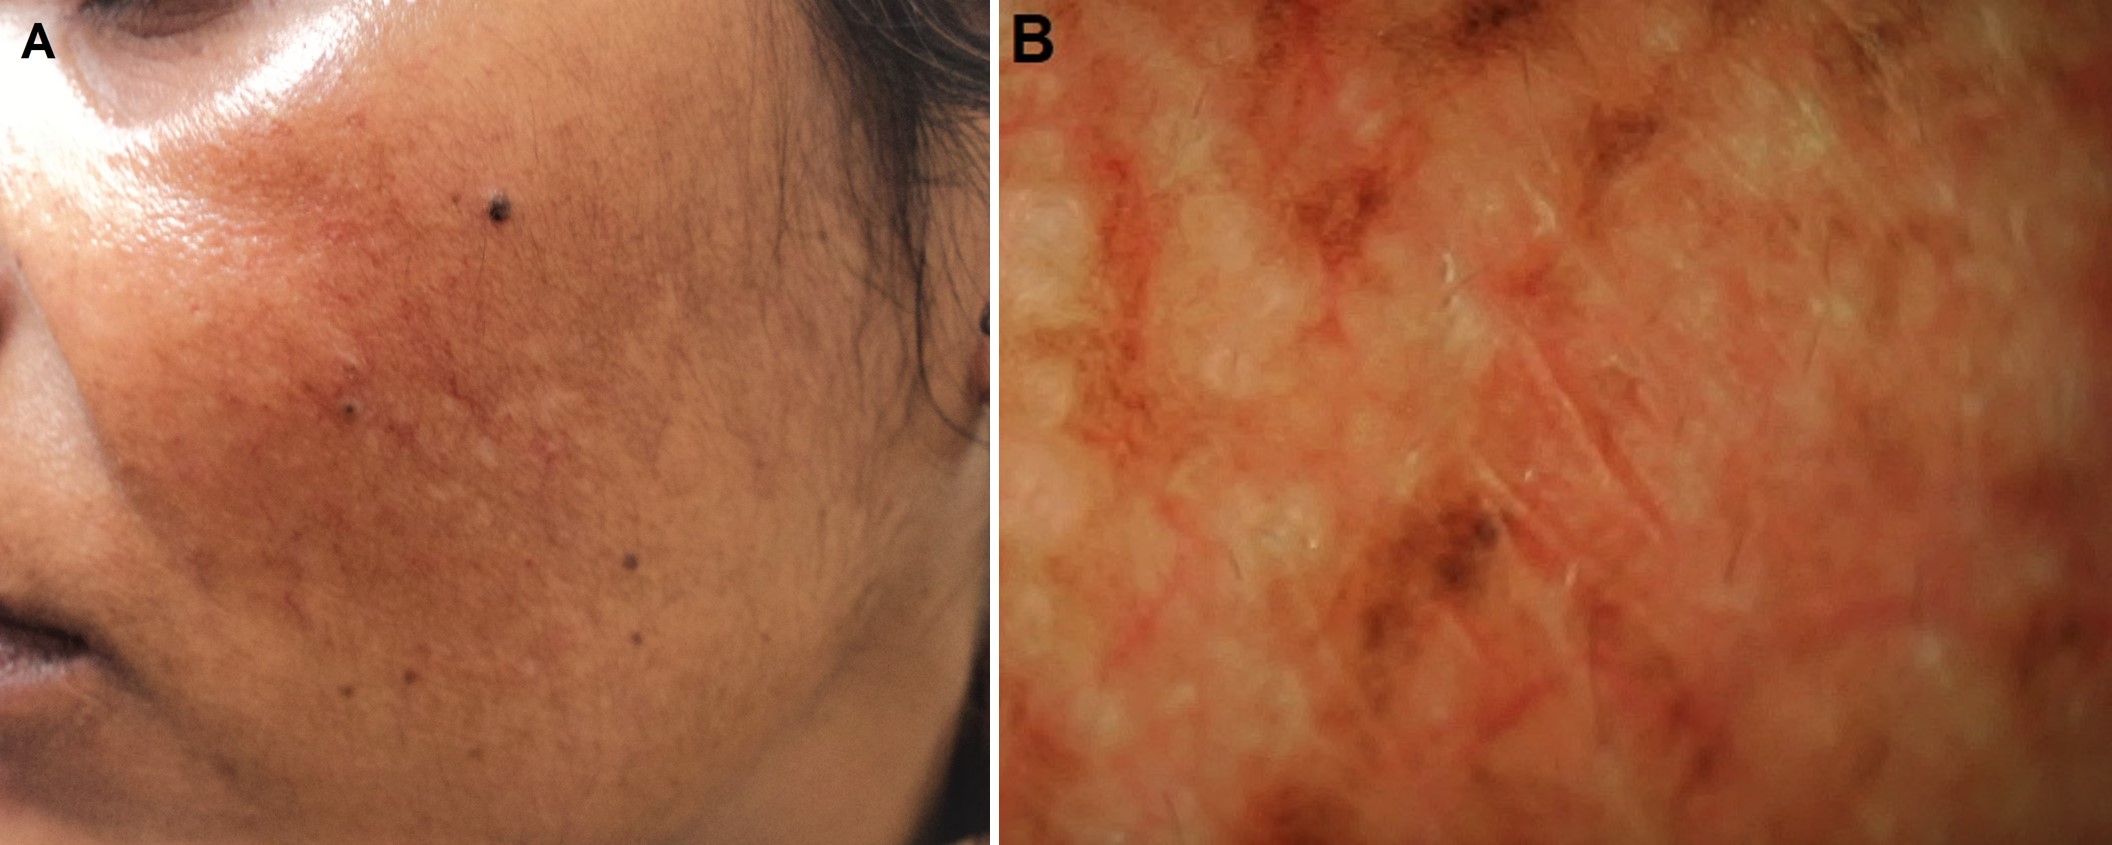 Figure 1: Treatment refractory melasma with history of mild photosensitivity in a 35-year old woman: A, Clinical image; and B, Dermoscopic image [E-Scope, Timpac Health Care Pvt